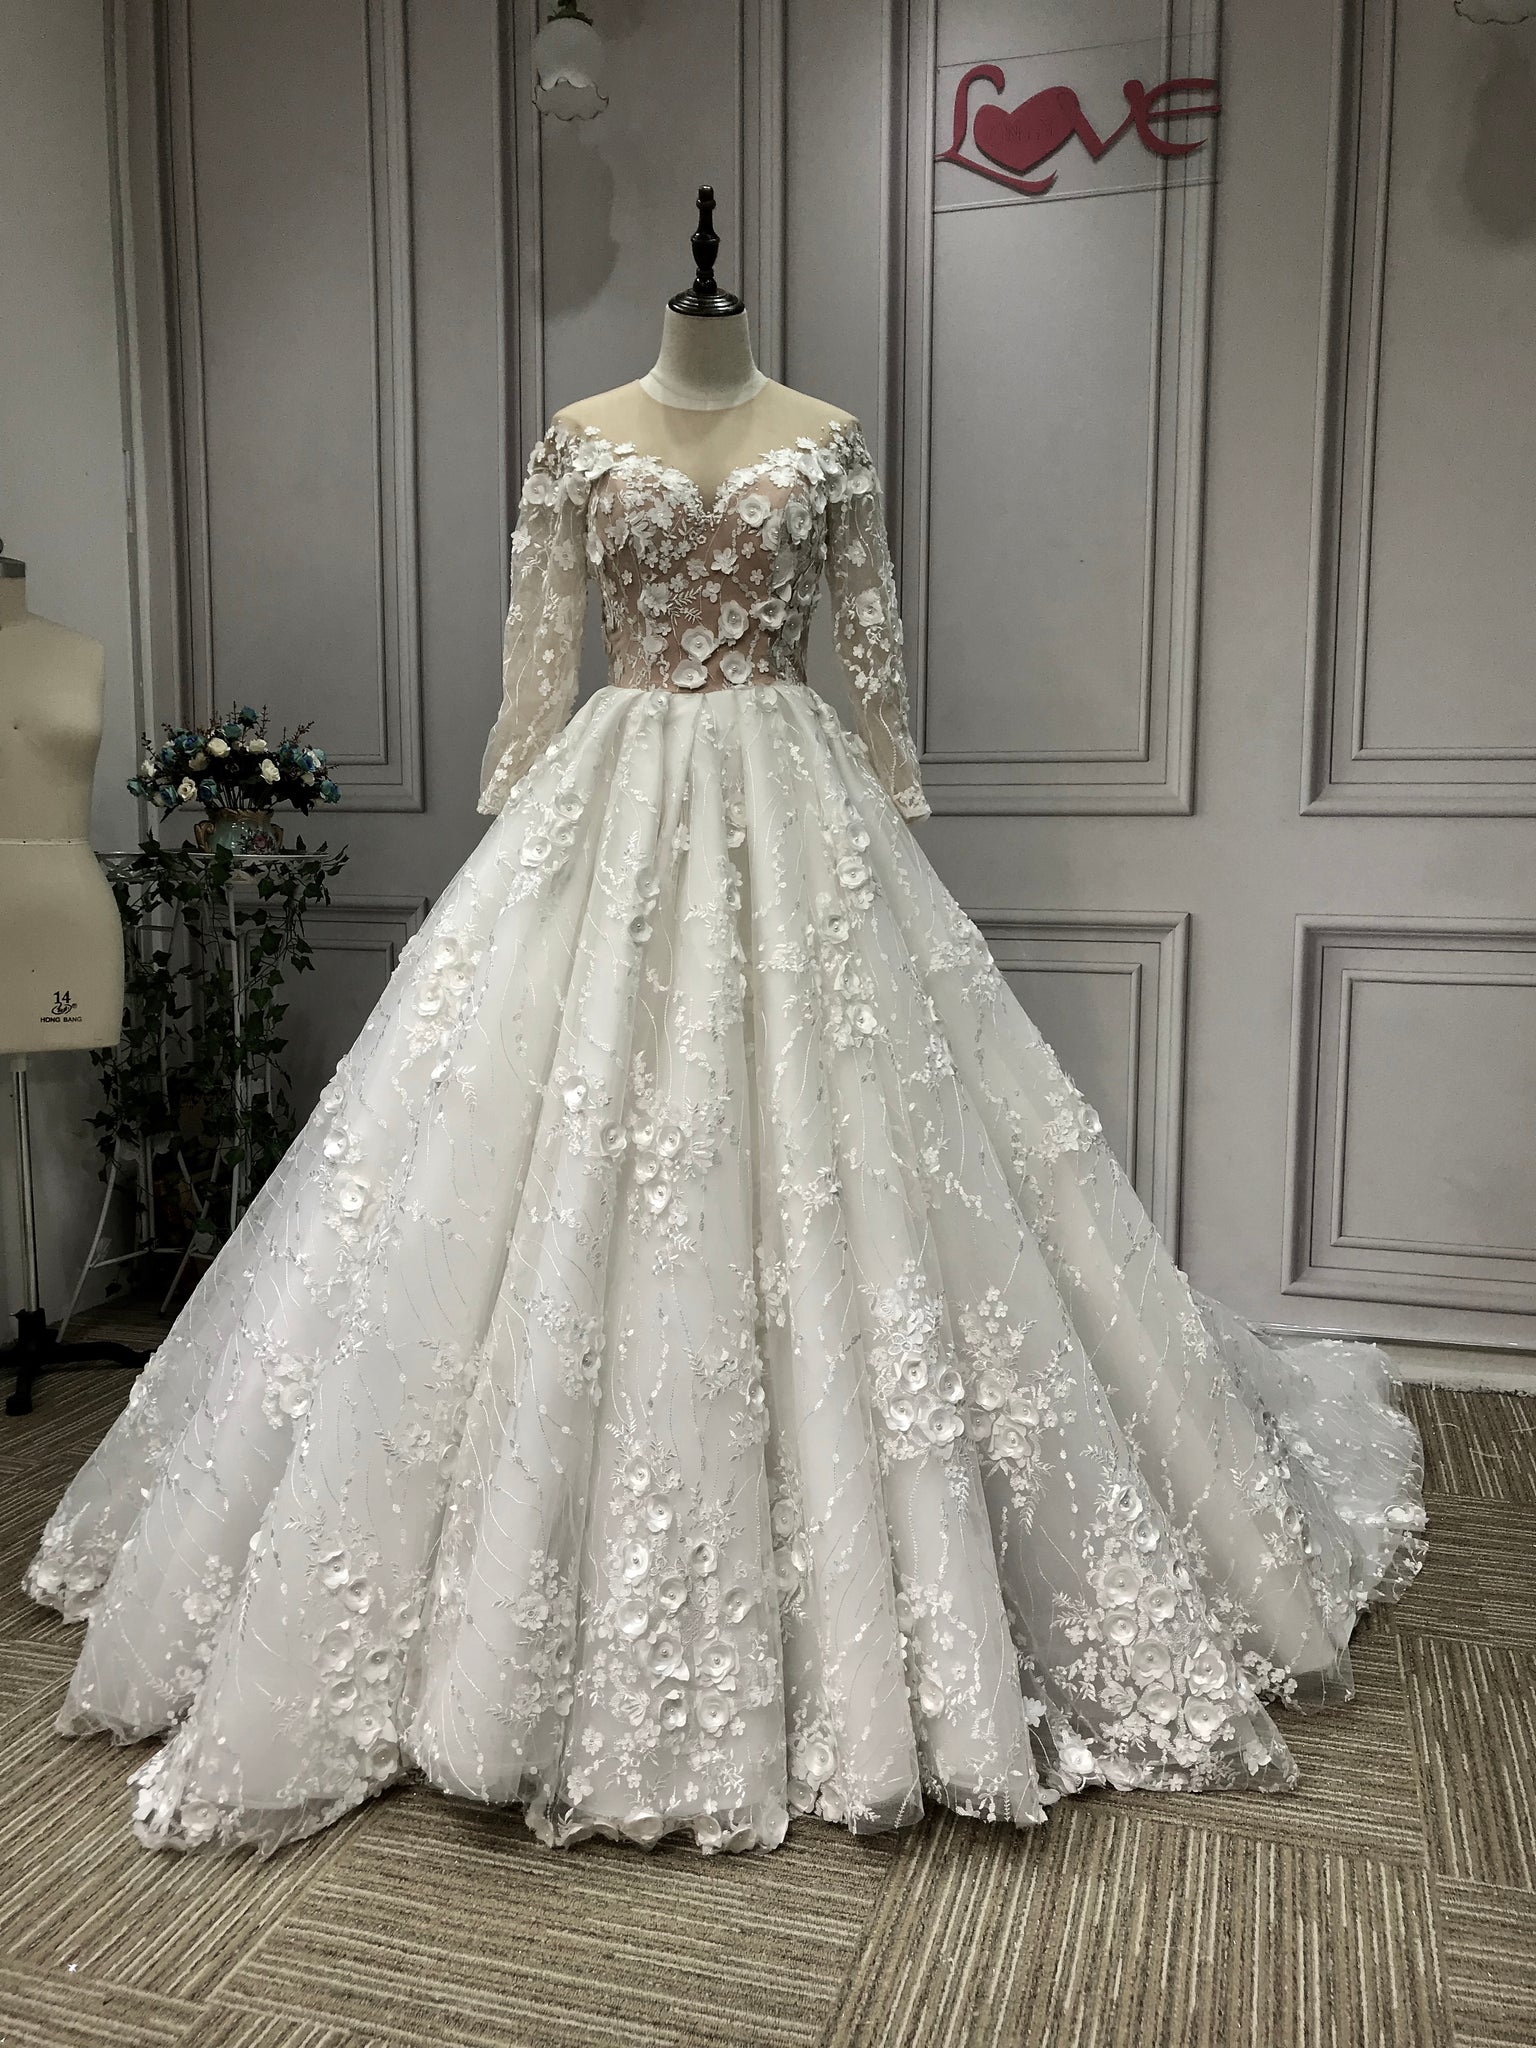 Luxury High Neck Long Sleeves Crystal Ball Gown Wedding Dress | Haute  Couture Bridal Gowns | Ball gowns, Ball gowns wedding, Couture bridal gowns